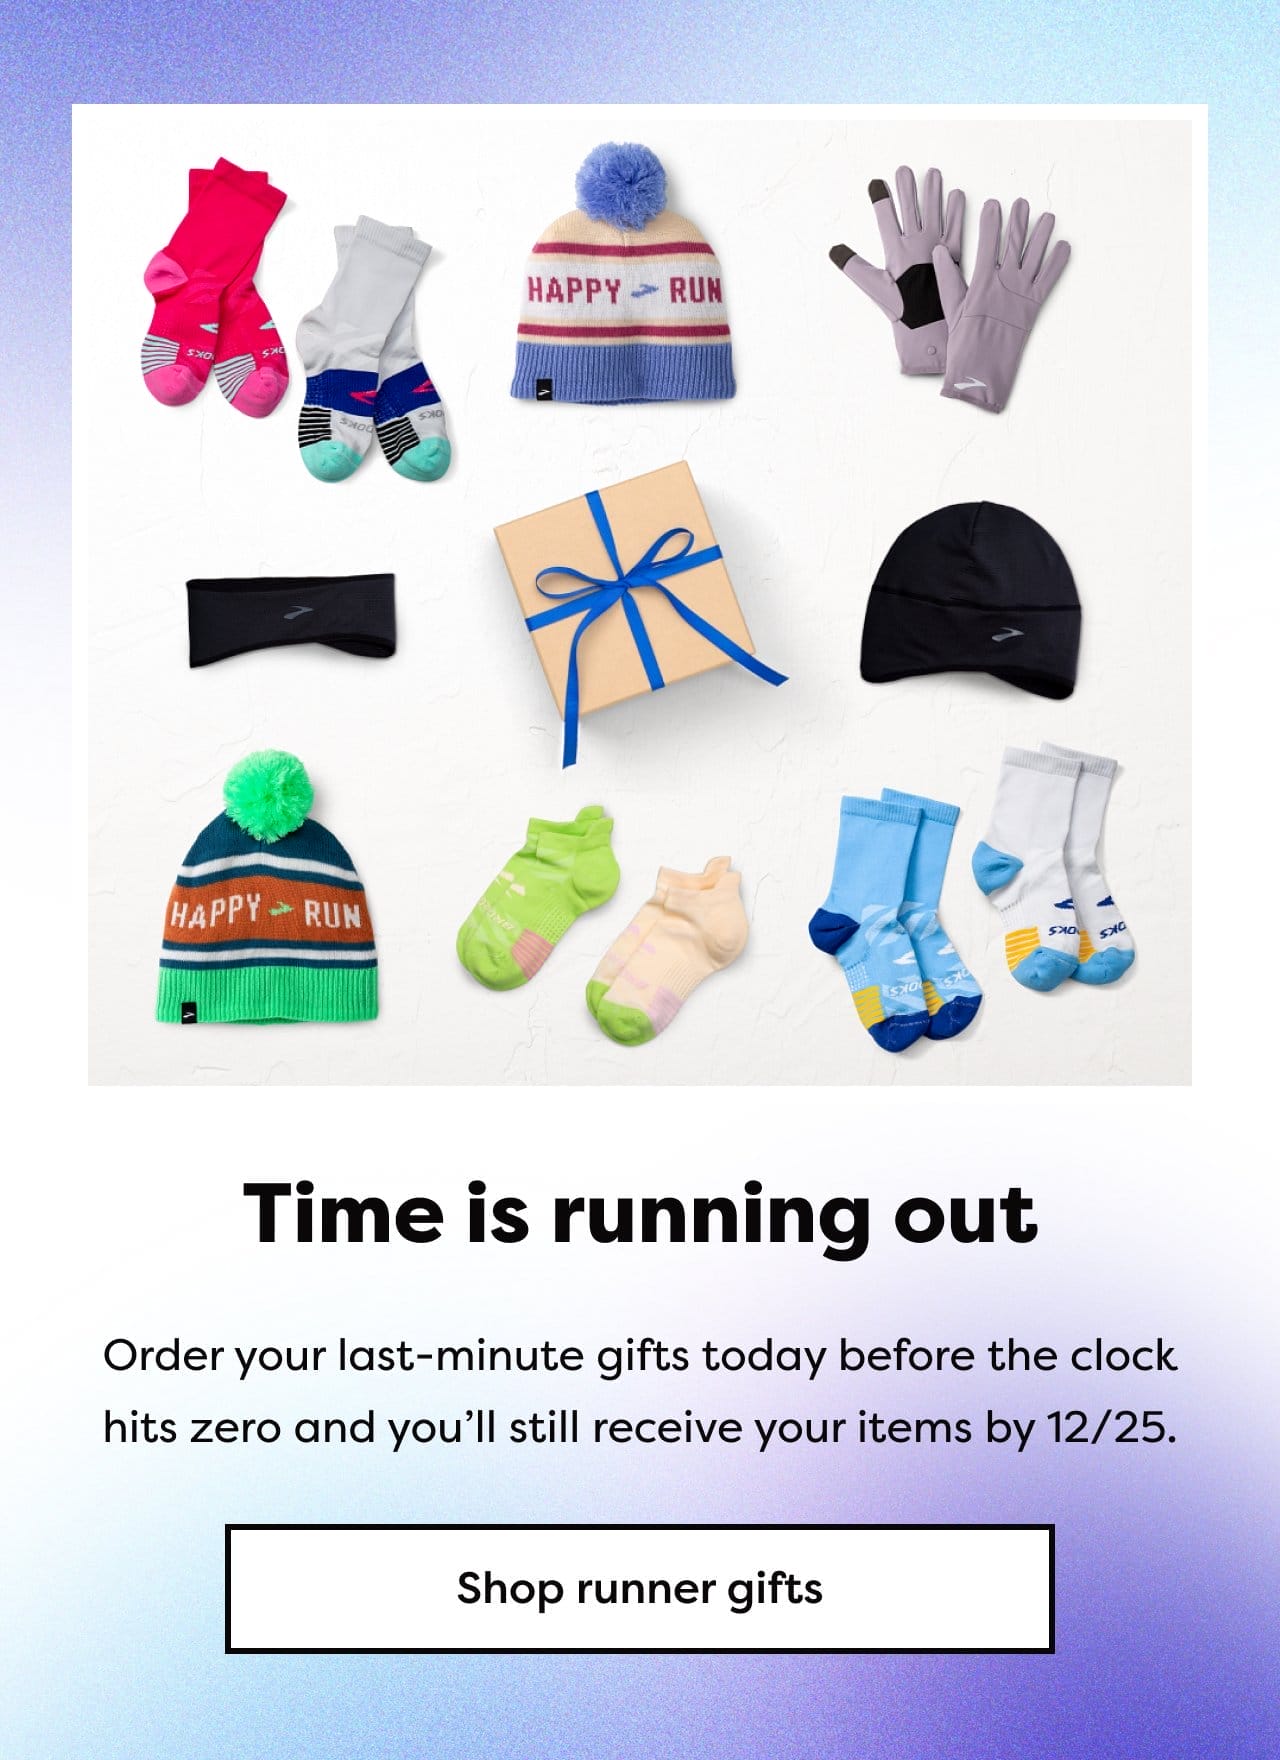 Time is running out - Order your last-minute gifts today before the clock hits zero and you'll still receive your items by 12/25. | Shop runner gifts